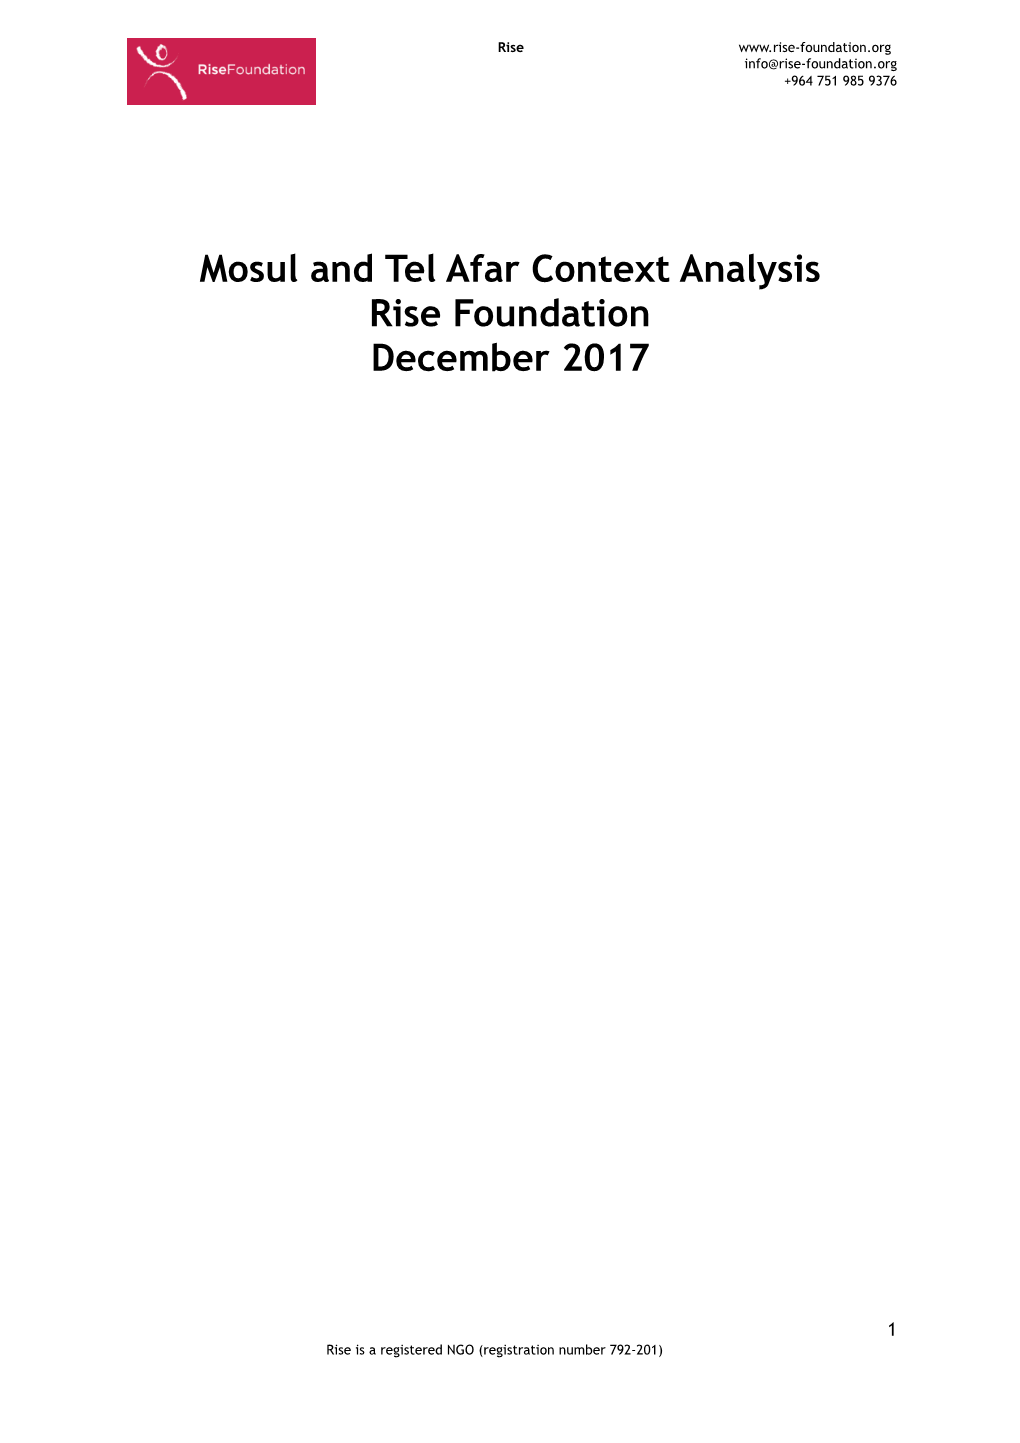 Mosul and Tel Afar Context Analysis Rise Foundation December 2017